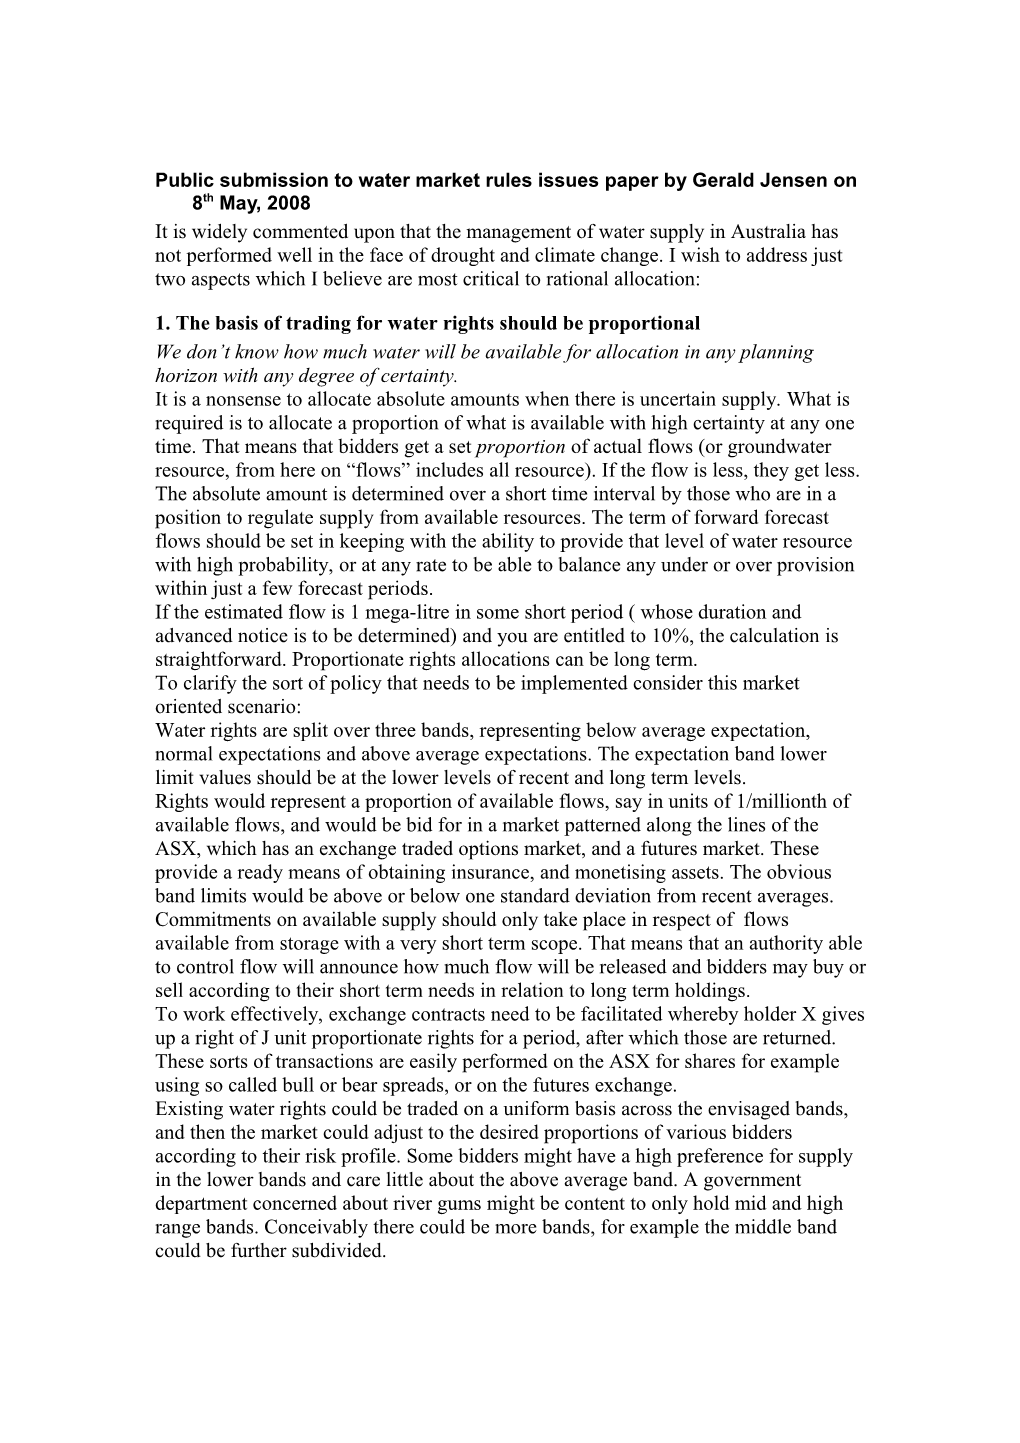 Public Submission to Water Market Rules Issues Paper by Gerald Jensen on 8Th May, 2008